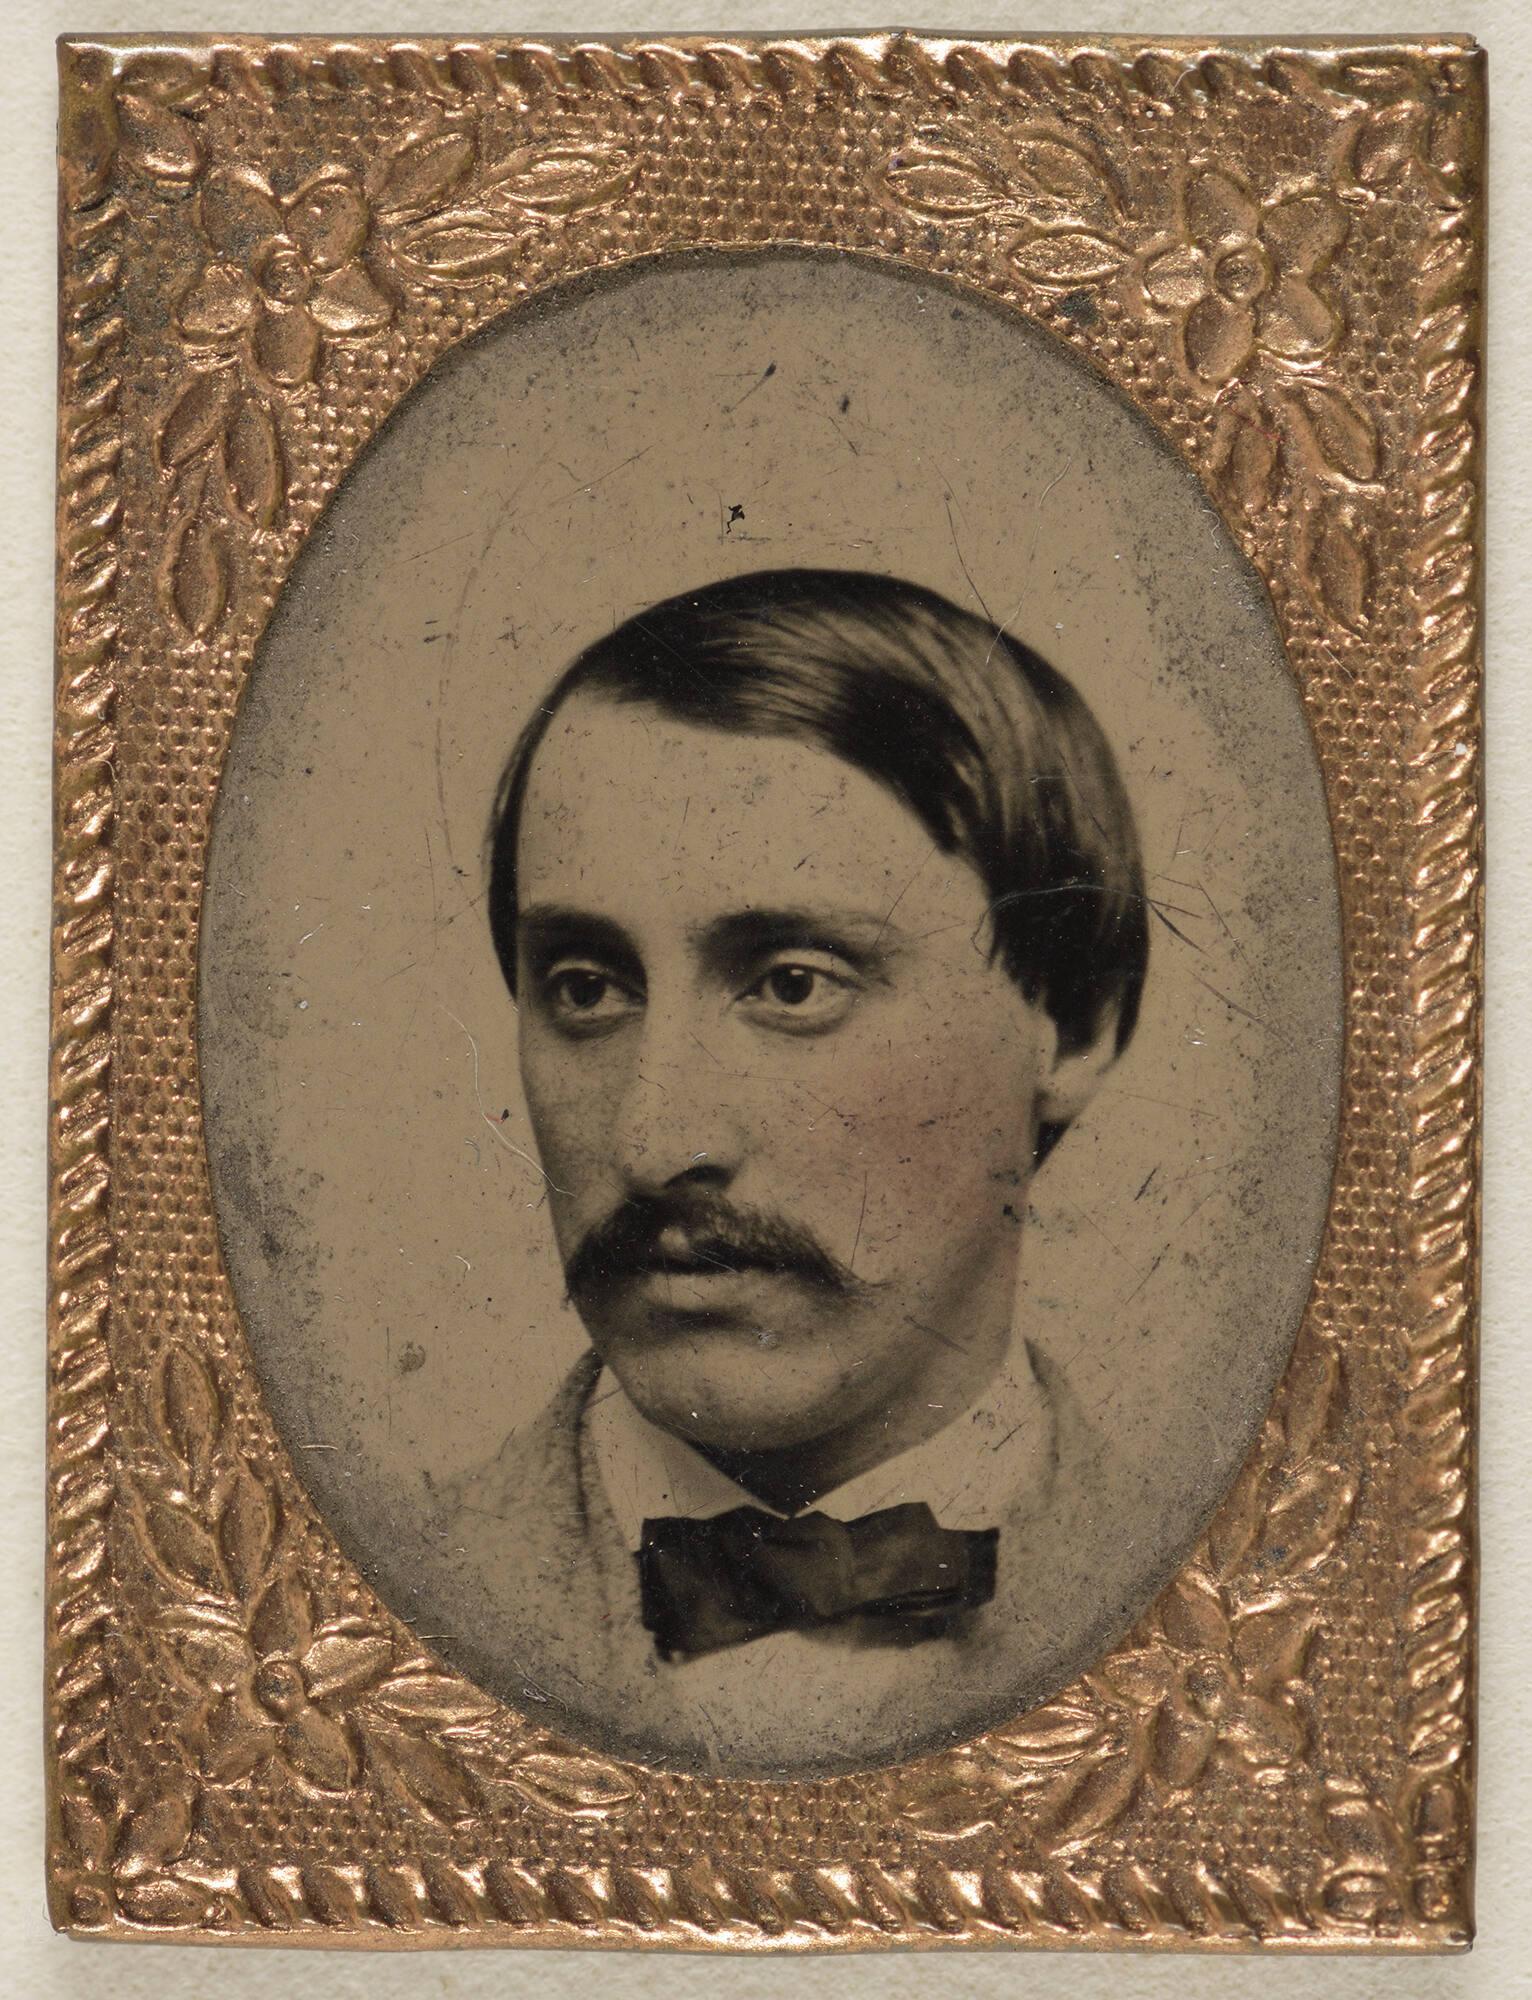 Black and white oval photograph of the head and shoulders of John Lowell Gardner Jr., a white man with short dark hair and mustache in 19th century dress.